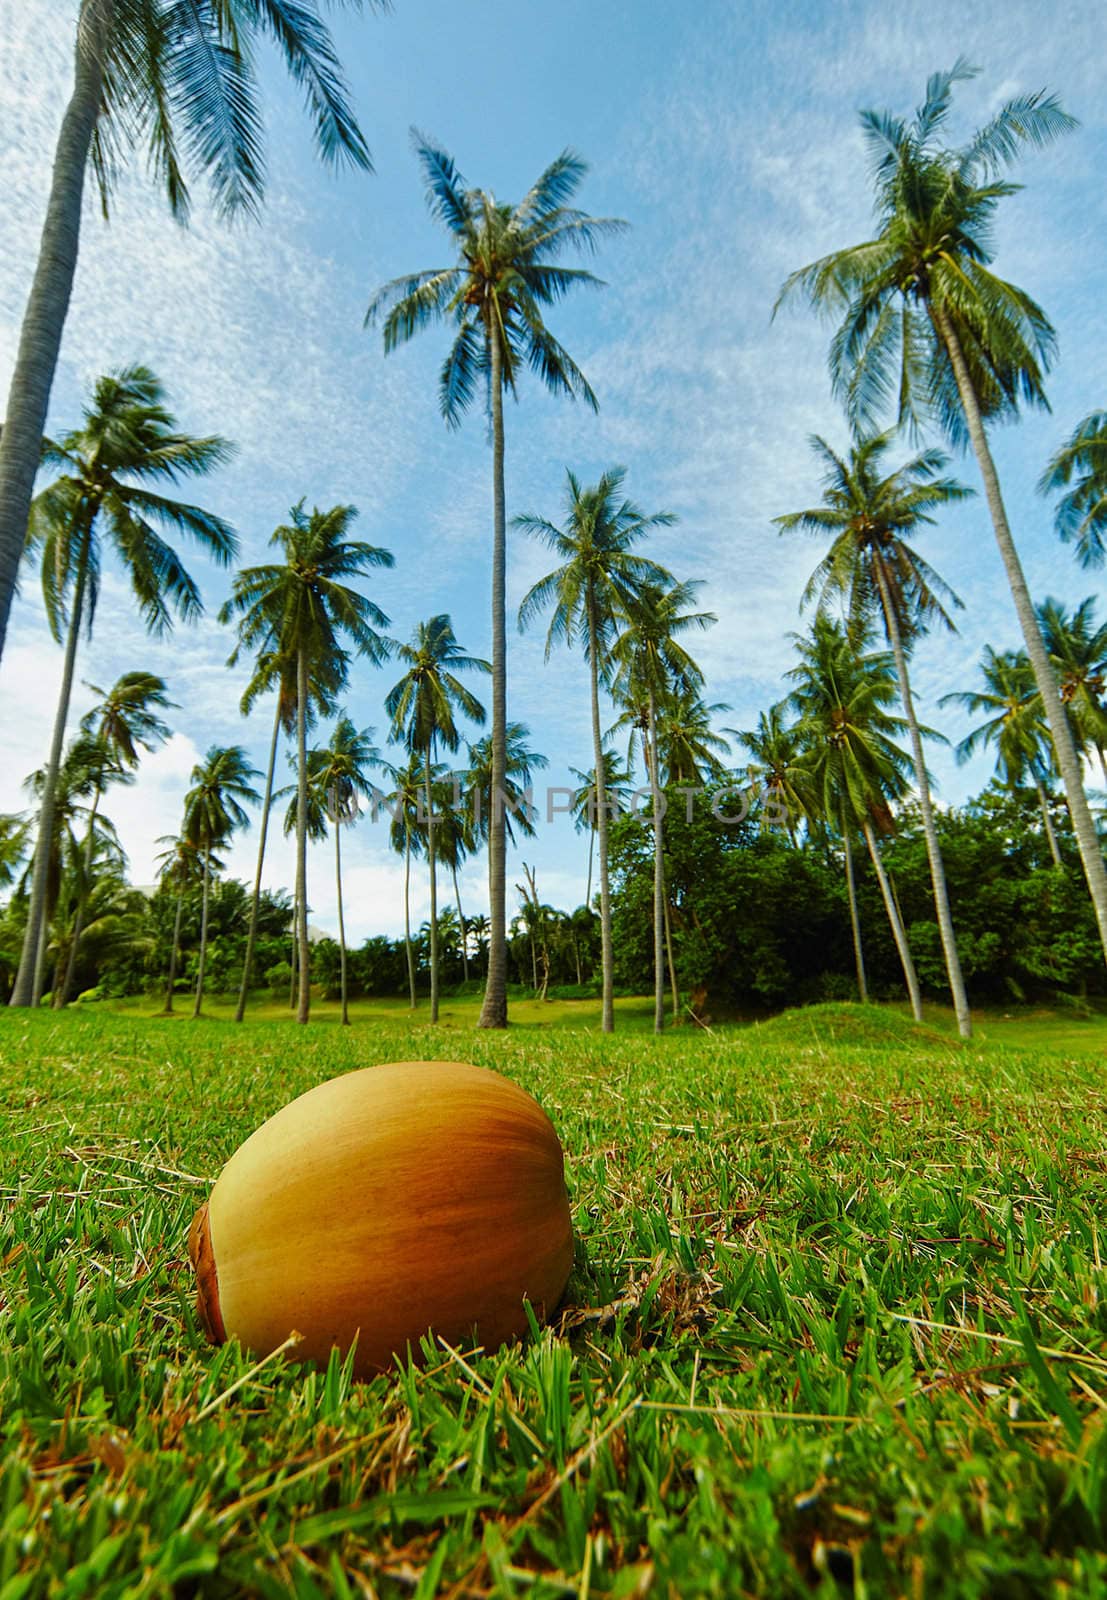 Coconut lying on grass under palm by pzaxe